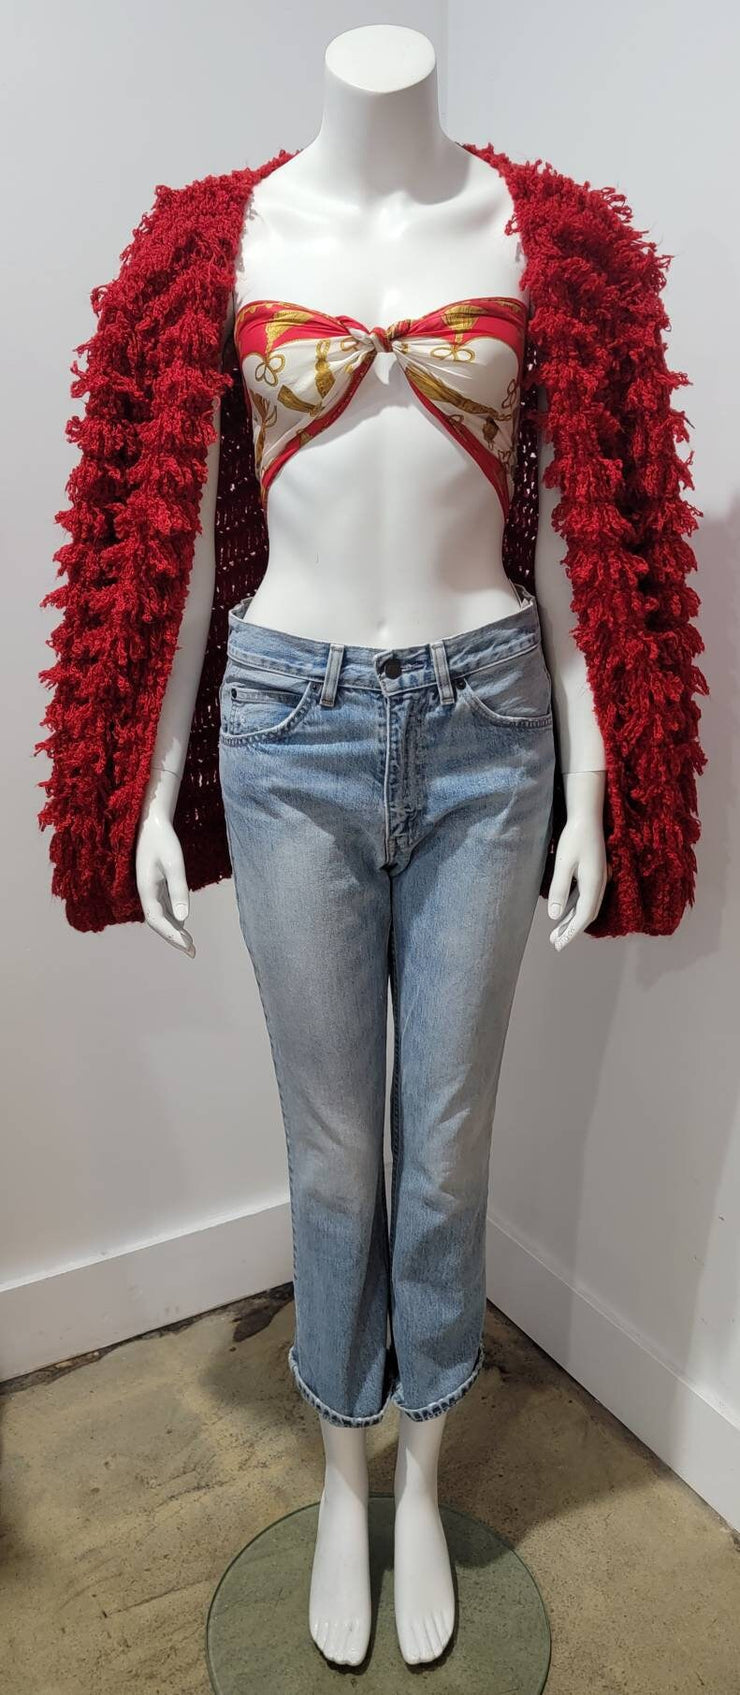 Vtg RED 80s Crochet Red Shag Fringe Crossfront Sweater by Carducci